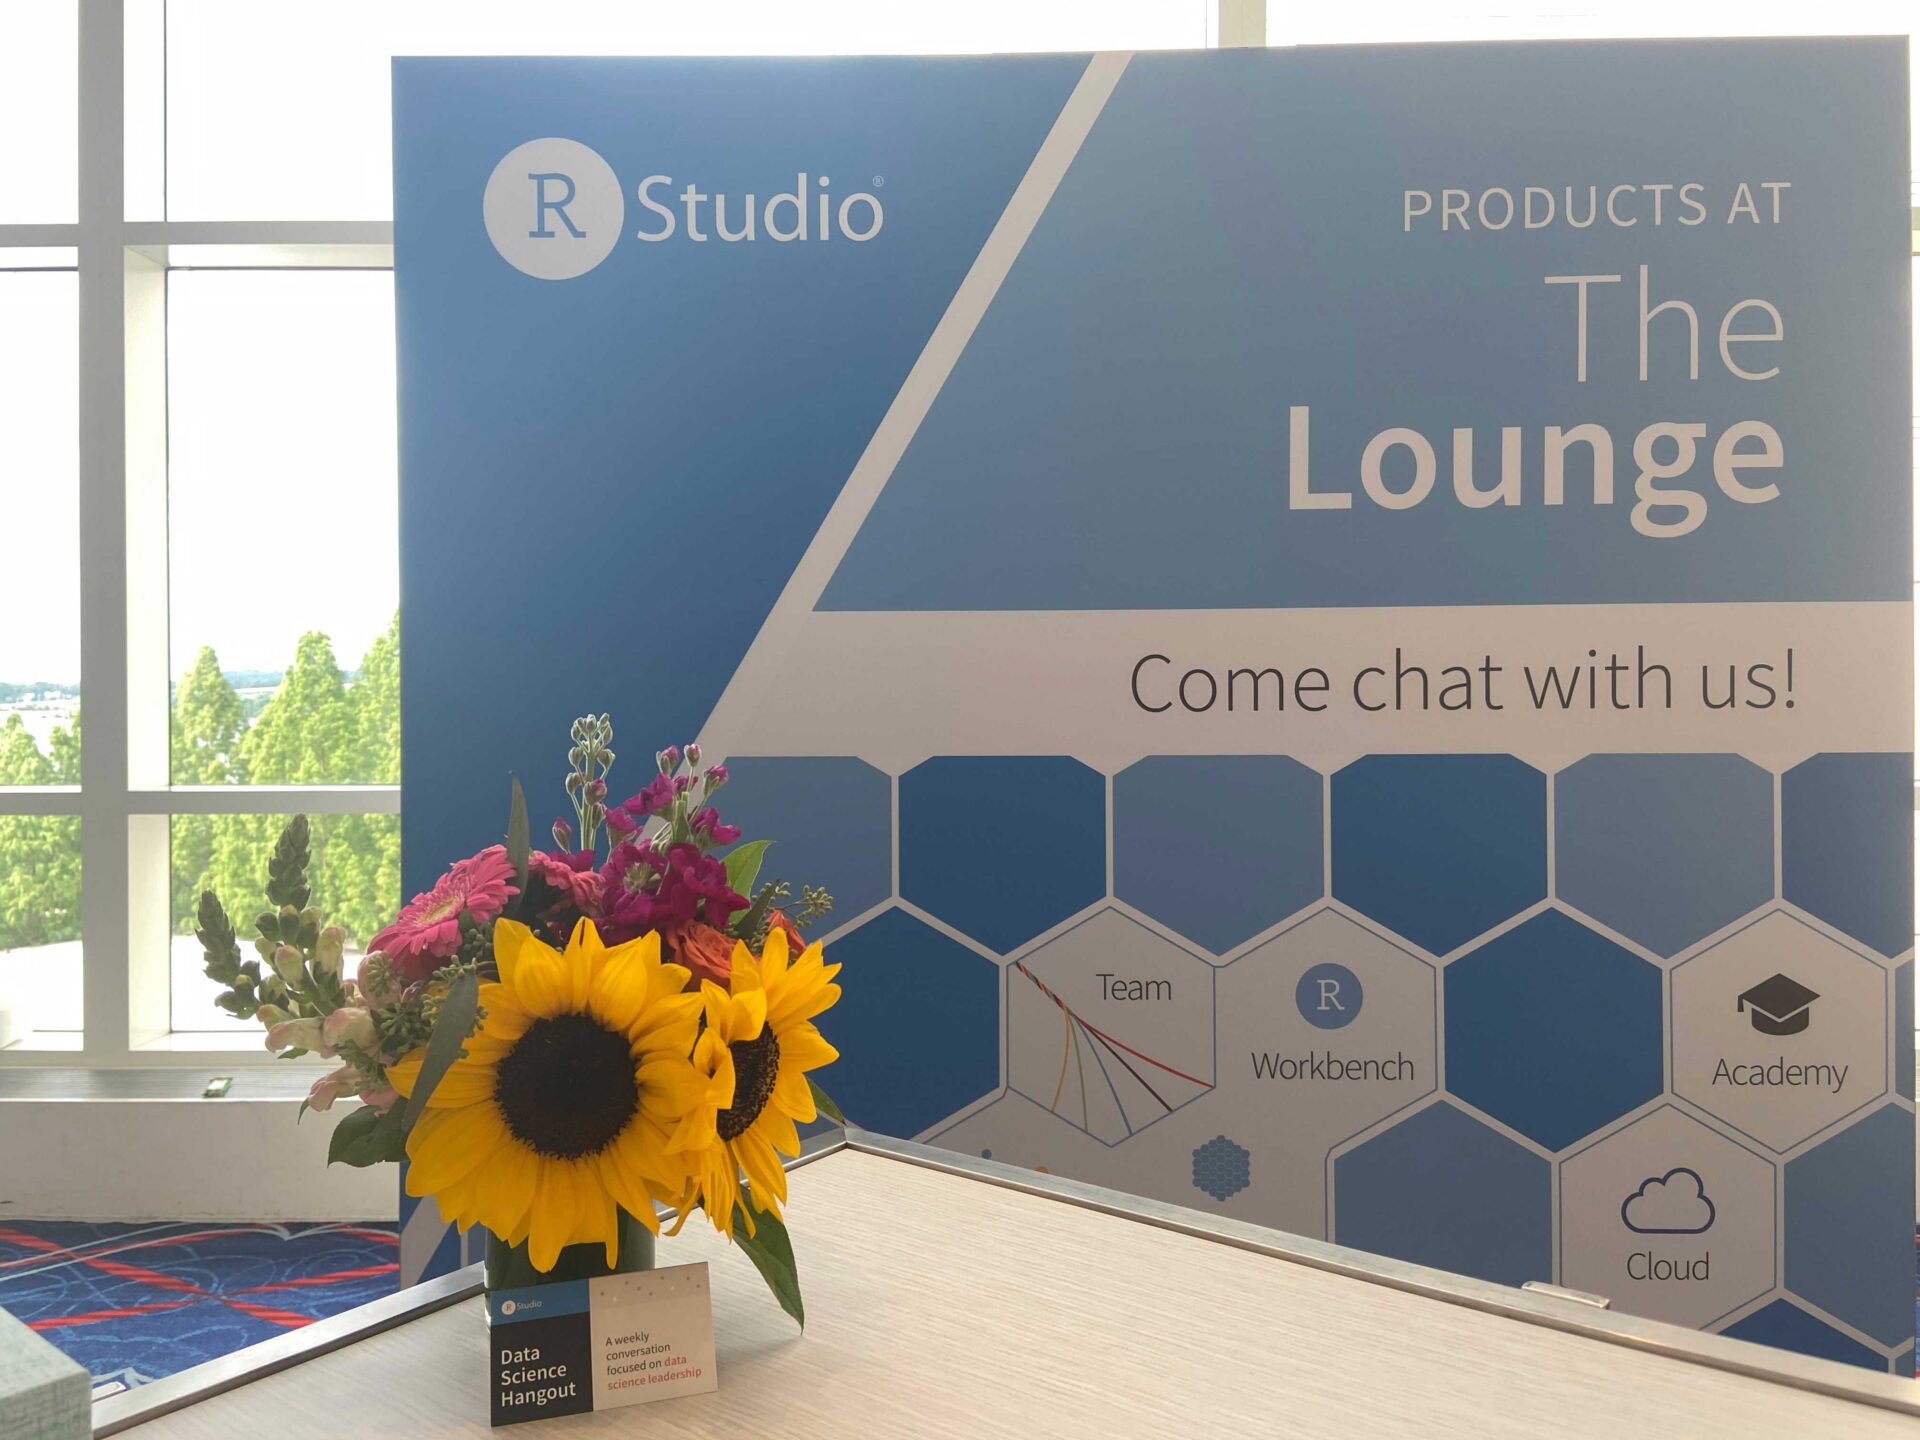 Text: RStudio Products at The Lounge, Come chat with us! Team, Workbench, Academy, Cloud, booth backdrop behind table with flowers and Data Science Hangout card